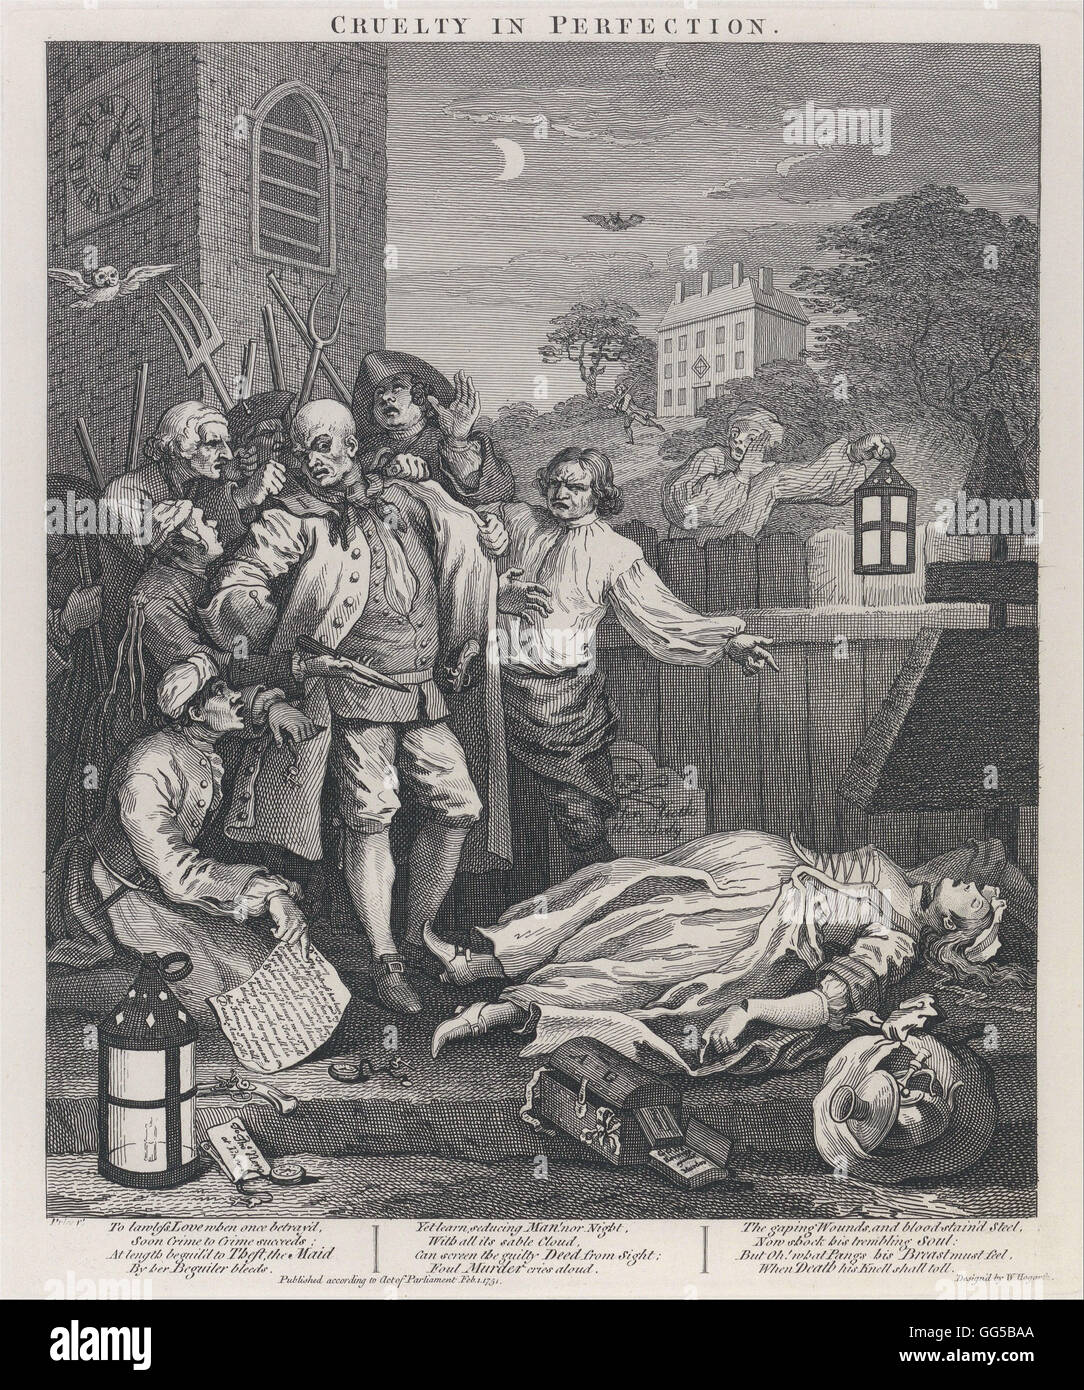 William Hogarth - The Third Stage of Cruelty- Cruelty in Perfection - The Murder Stock Photo